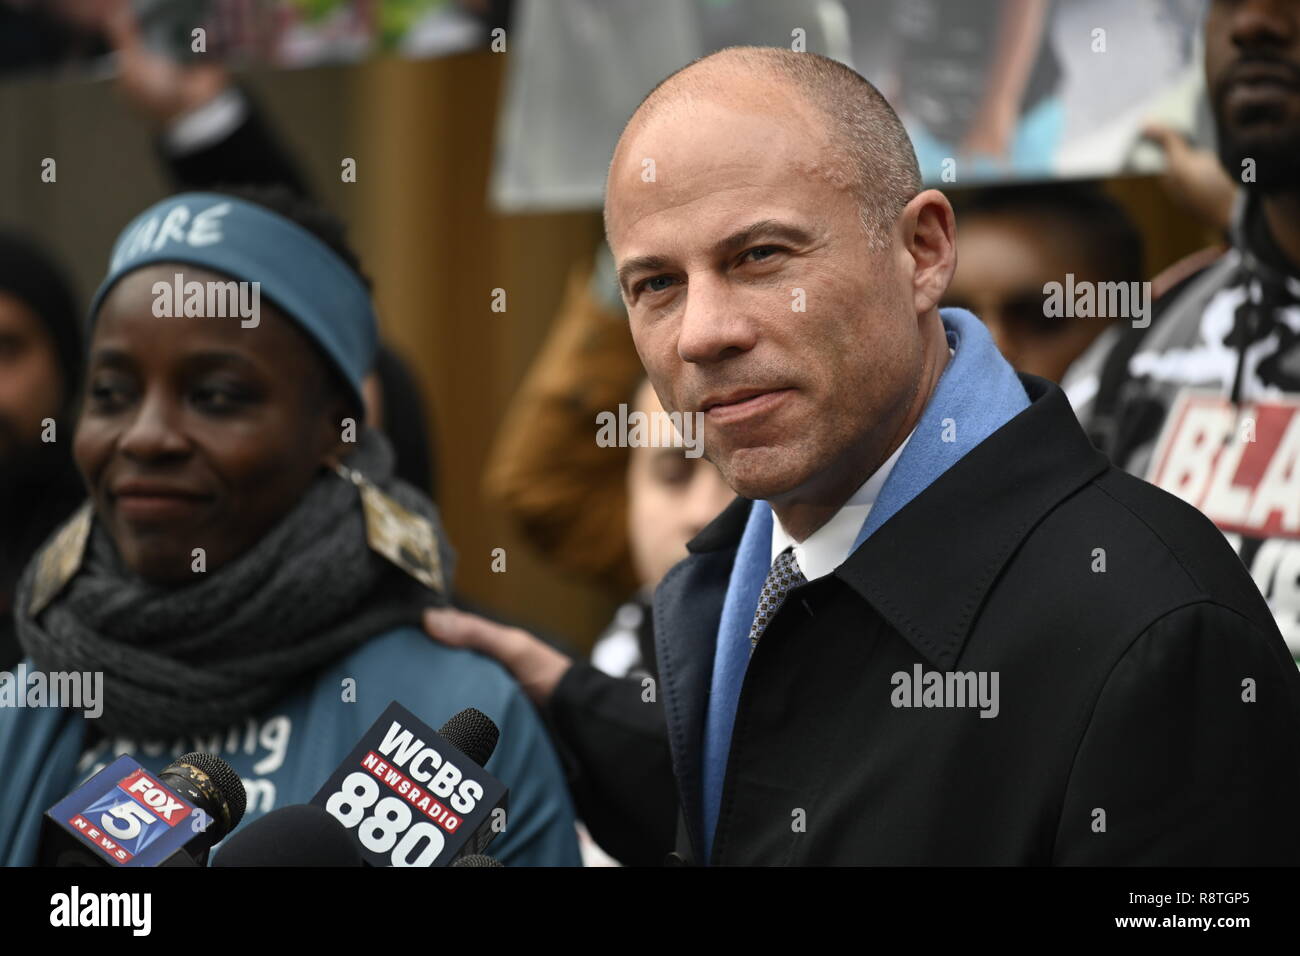 New York, USA. 17th Dec, 2018. New York, U.S., 17 December 2018 Michael Avenatti, one of Statue of Liberty climber Patricia Okoumou's attorneys, speaks outside federal court following her conviction by a federal magistrate judge on misdemeanor charges of trespassing, disorderly conduct, and interfering with the functioning of government for her act of civil disobedience on July 4. Okoumou climbed the base of the statue to protest against Trump administration immigration policies. She is to be sentenced on March 5, 2019. Credit: Joseph Reid/Alamy Live News Stock Photo